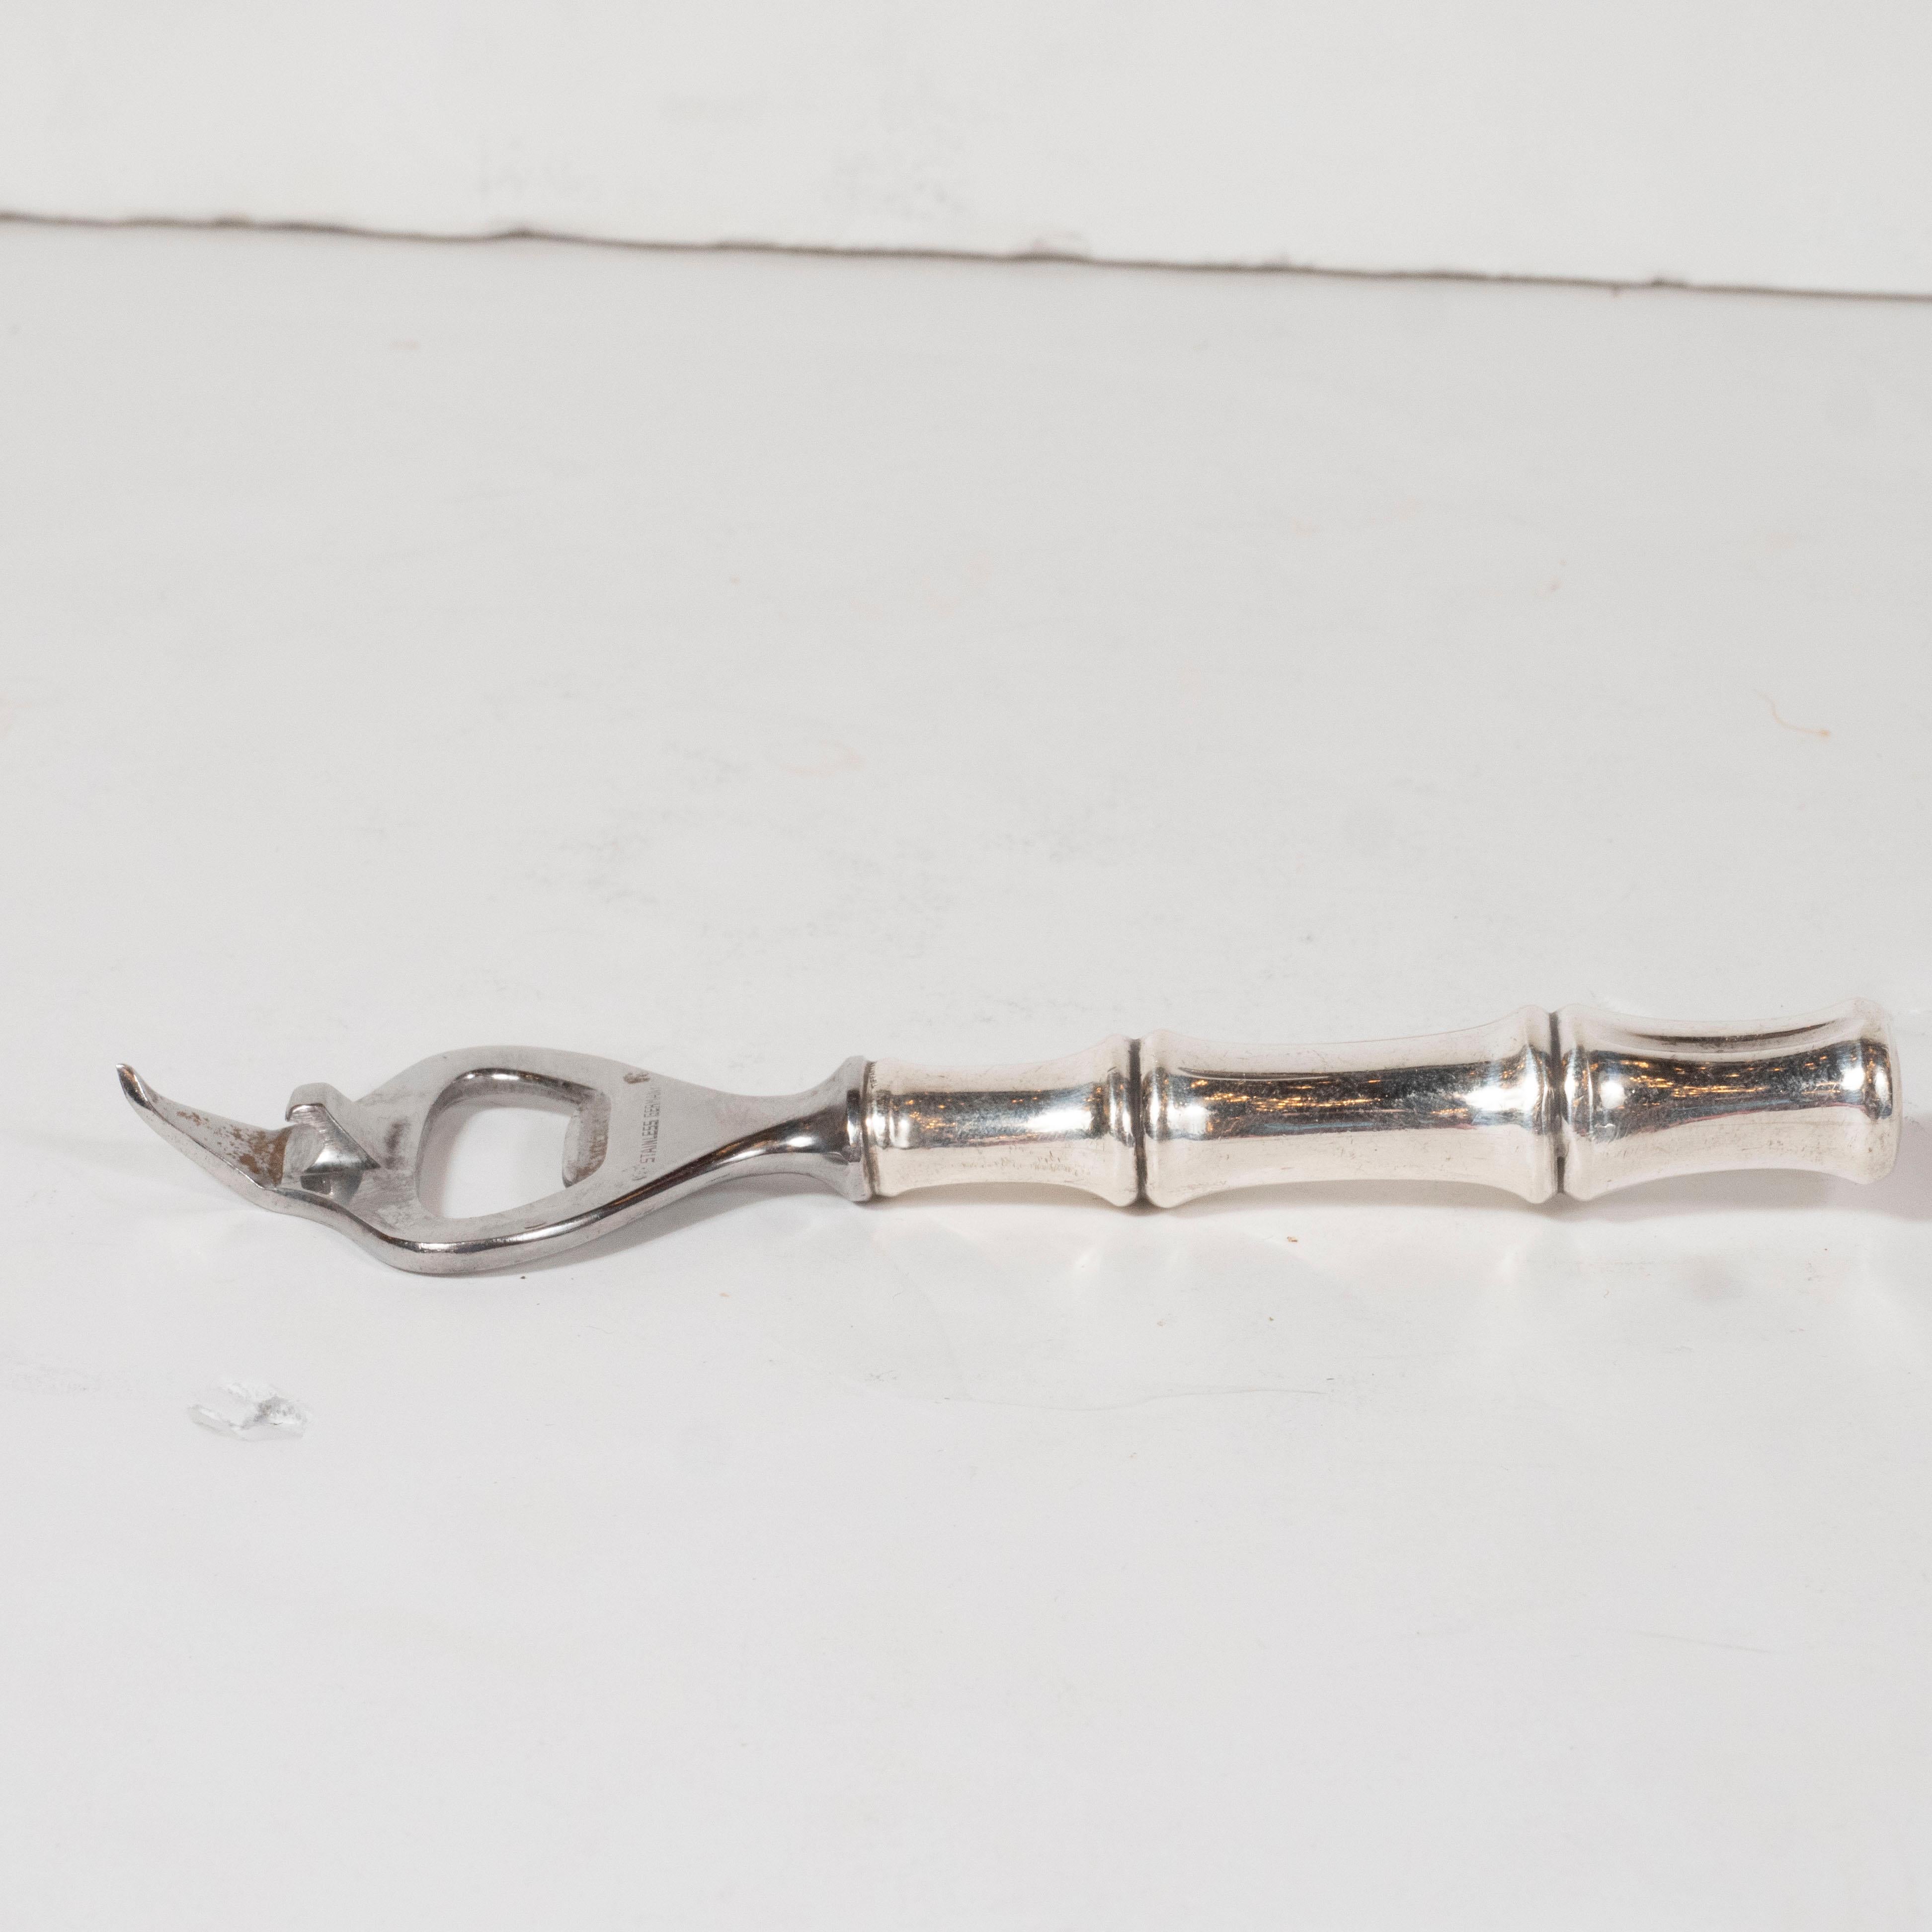 This elegant Mid-Century Modern bottle opener was realized by the fabled American design firm Tiffany & Co. in Germany circa 1950. It features a stylized sterling silver bamboo handle that flares into an ovoid head with a open center and a pointed